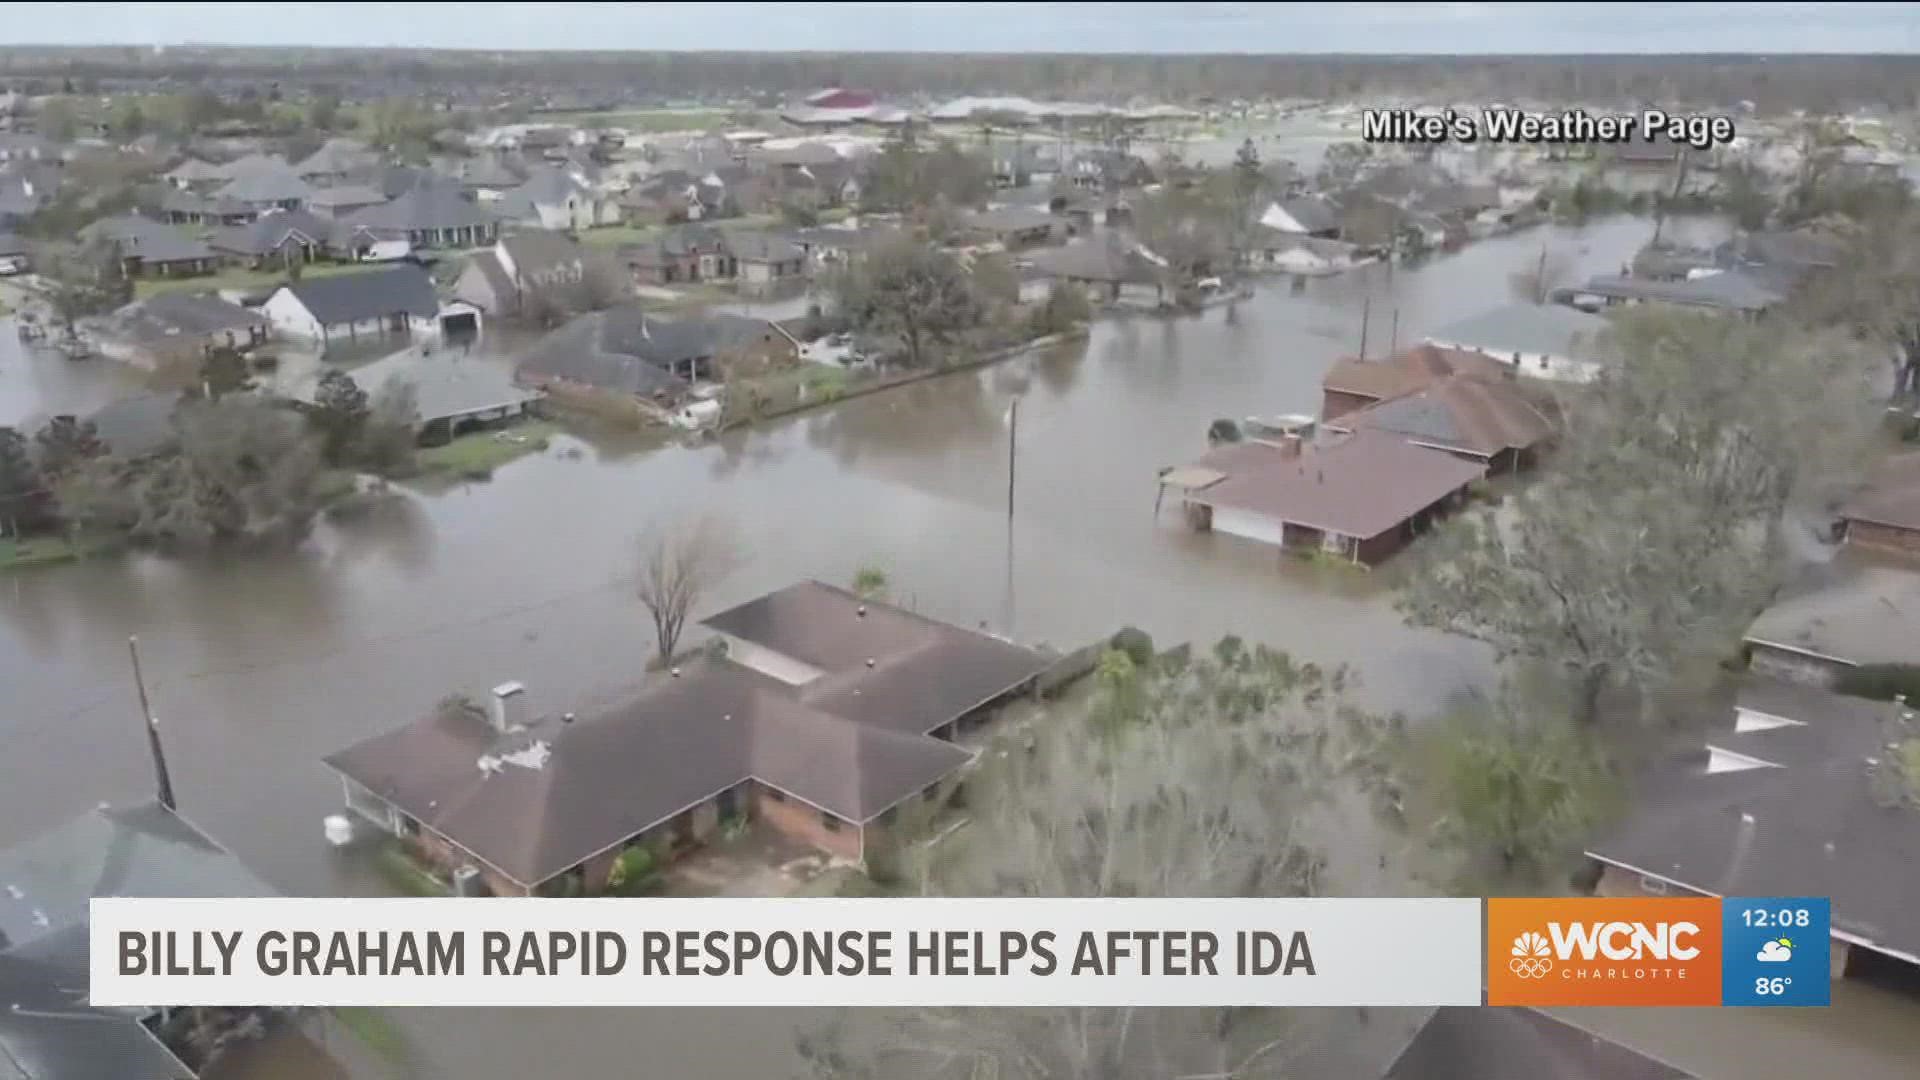 In the wake of Ida, several community organizations are trying to bring hope to those hurting after the storms.